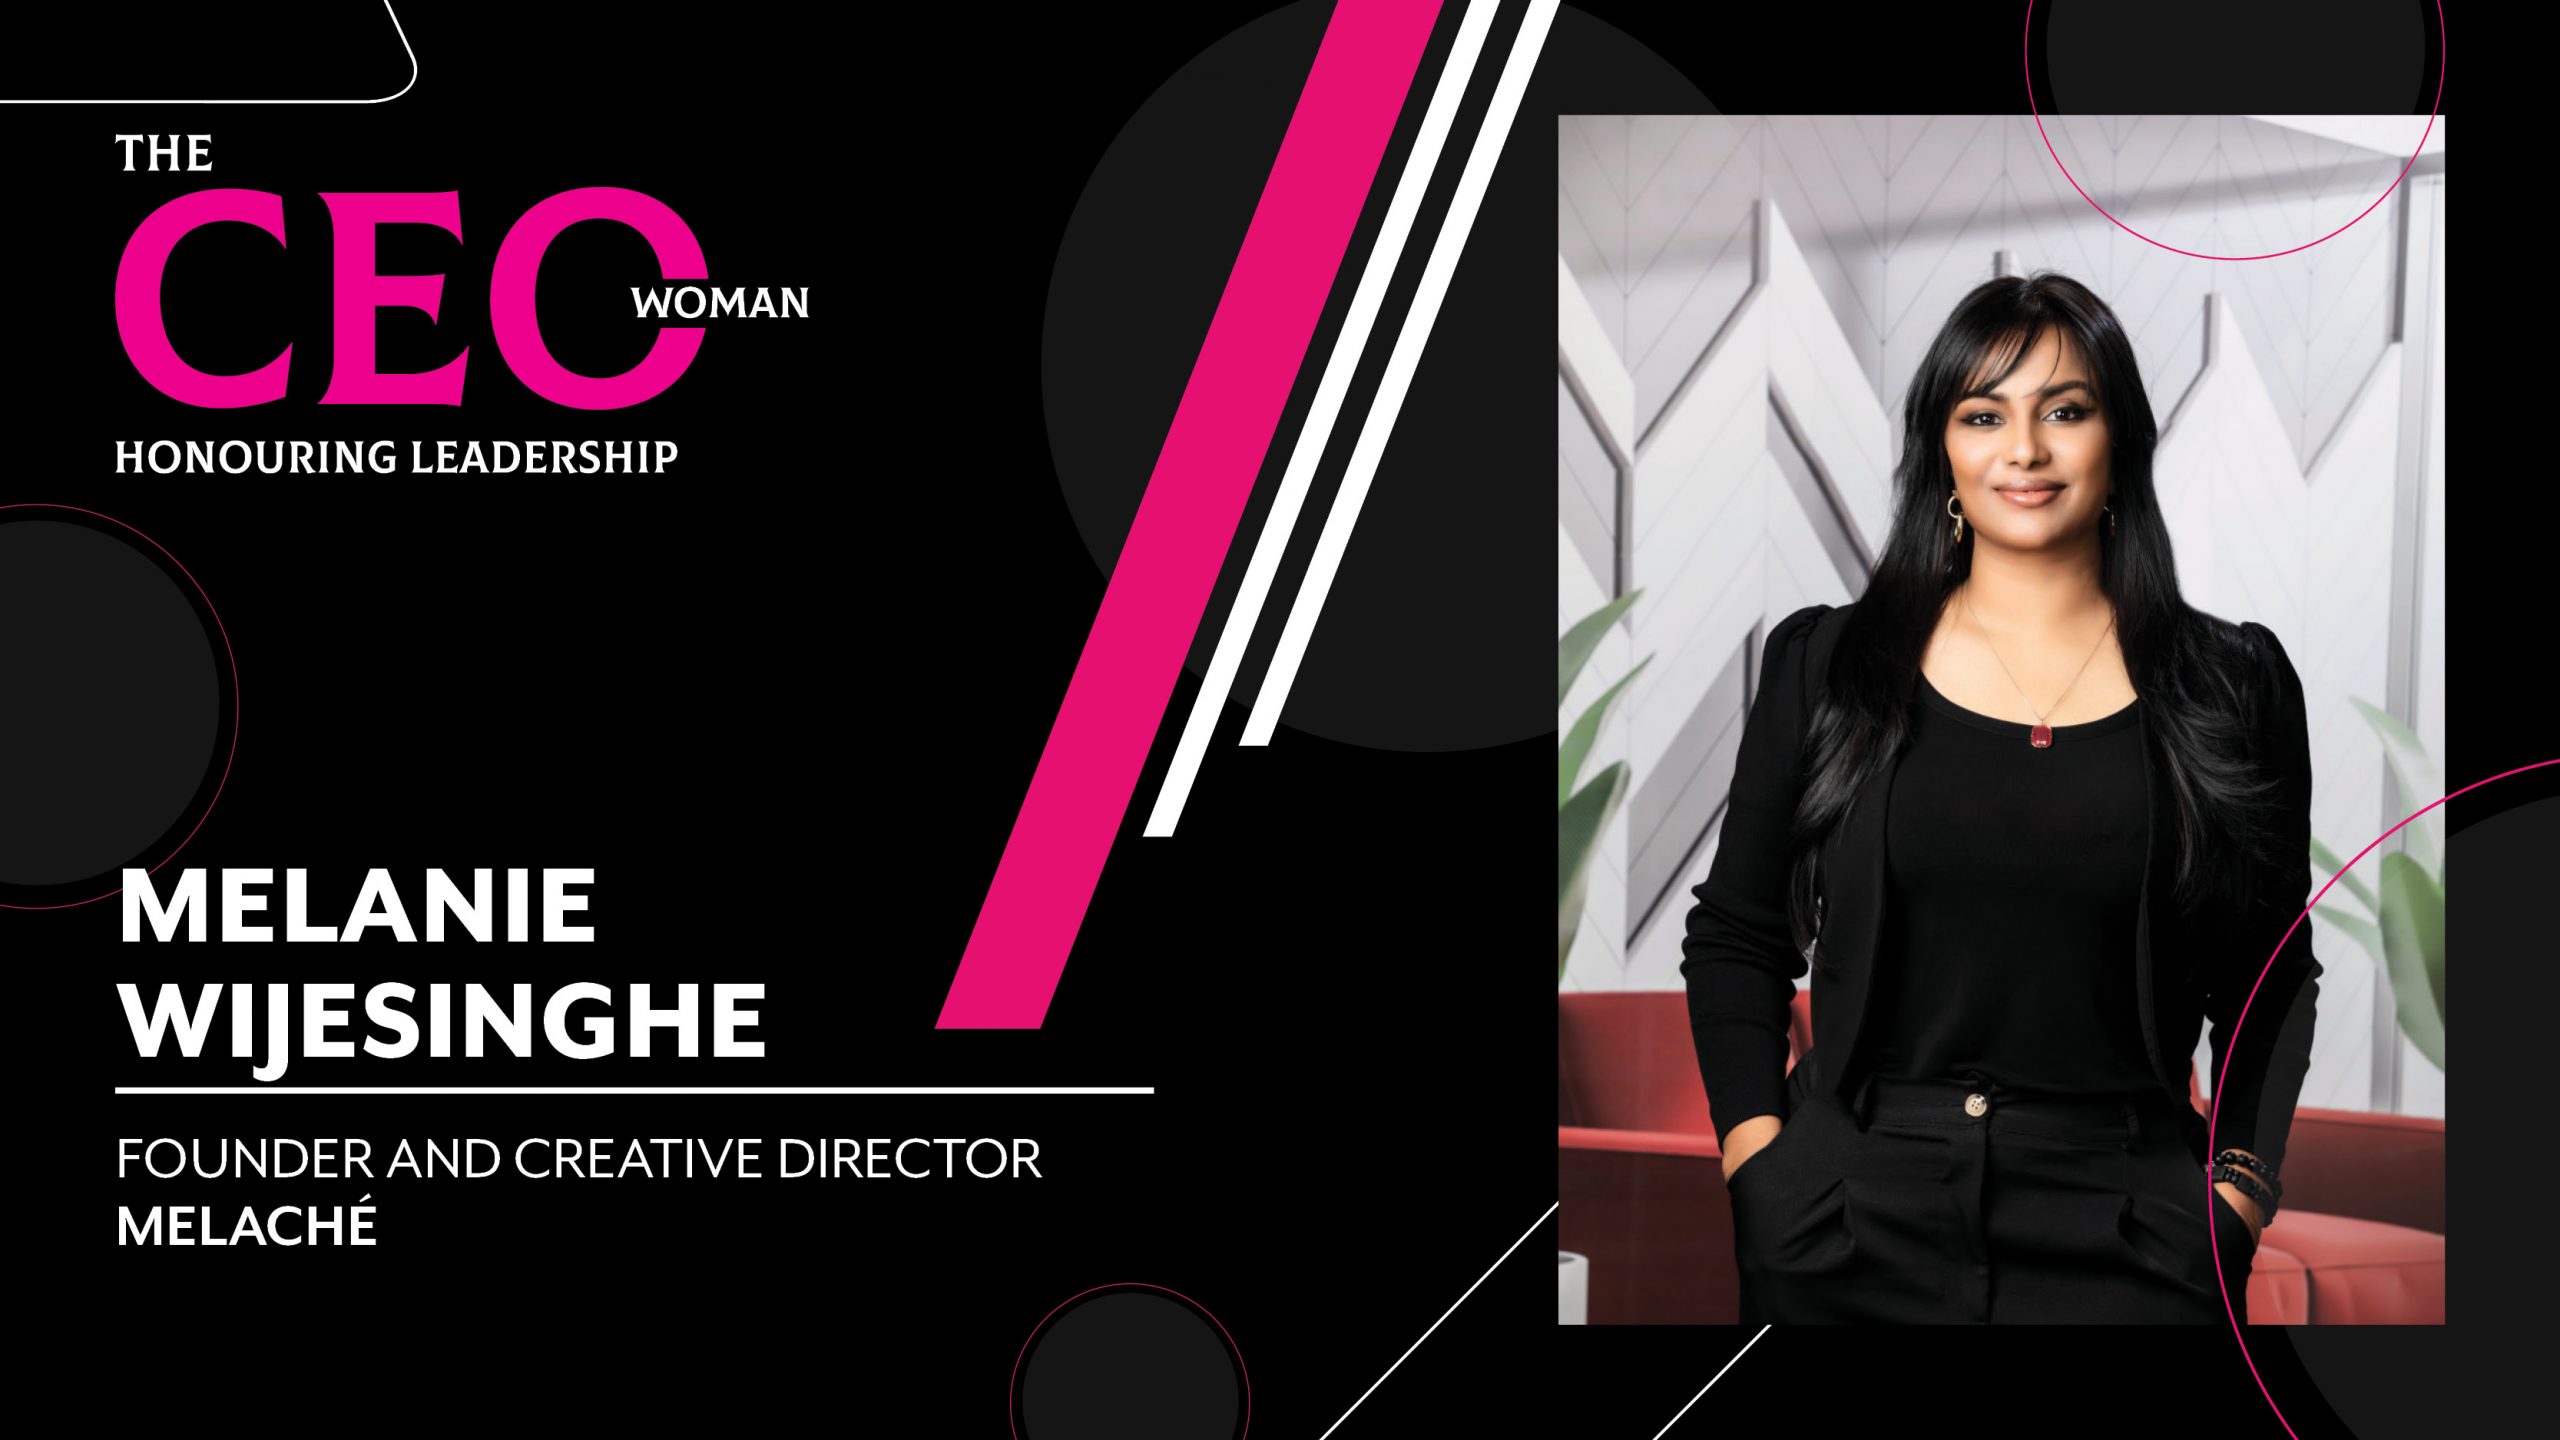 The Phenomenal Grace of an Inspiring Woman – the Founder and Creative Director of Melaché, Melanie Wijesinghe